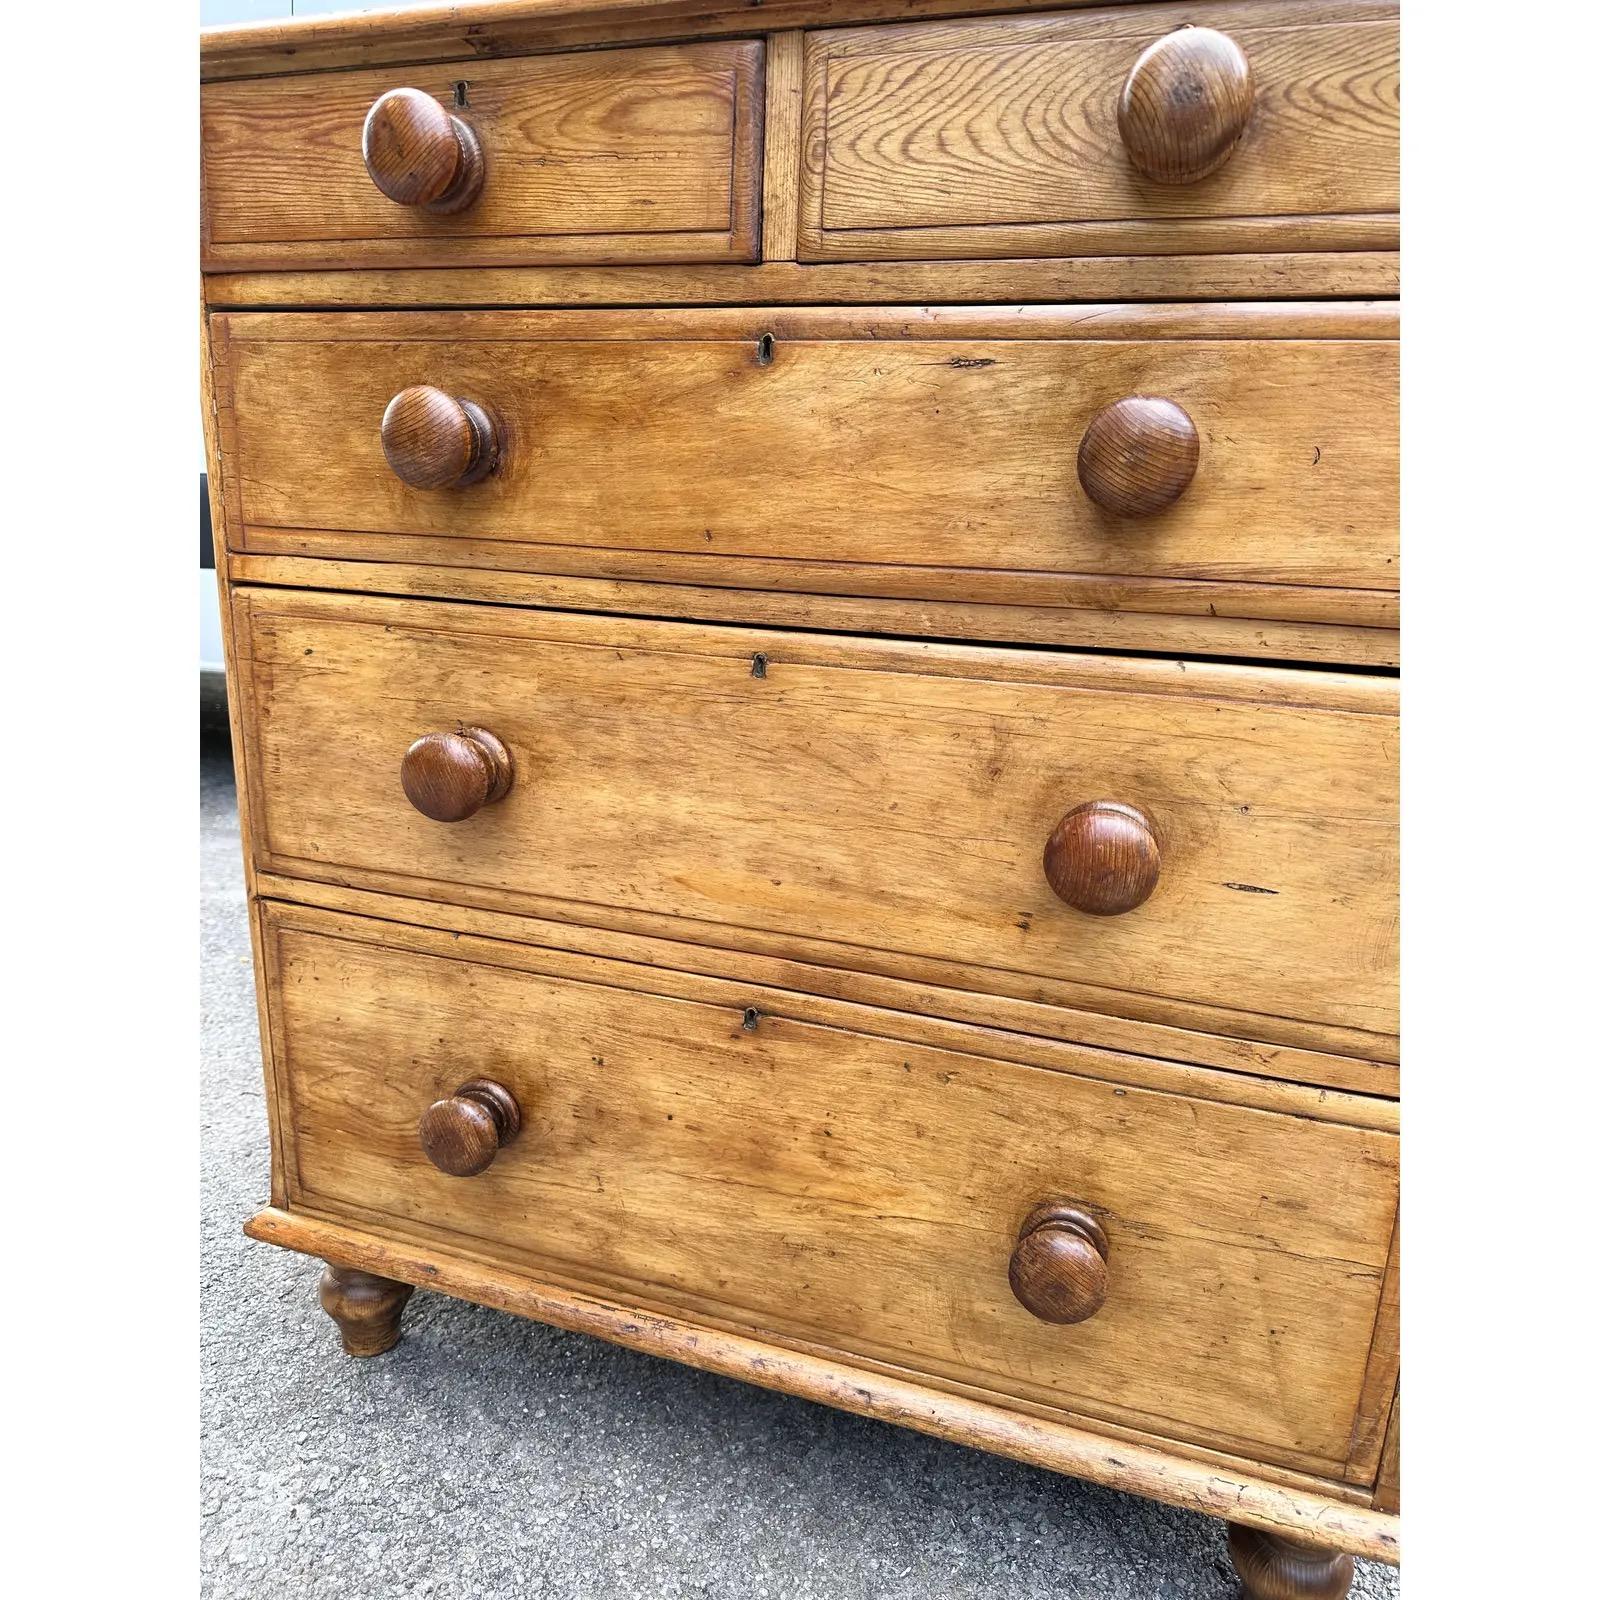 This is a lovely antique pine chest! This piece dates to the 19th century and has lovely patina. The wood has a warm glow, that is accented perfectly by the darker stained knobs. This chest is two over three design with a rustic feel. This chest